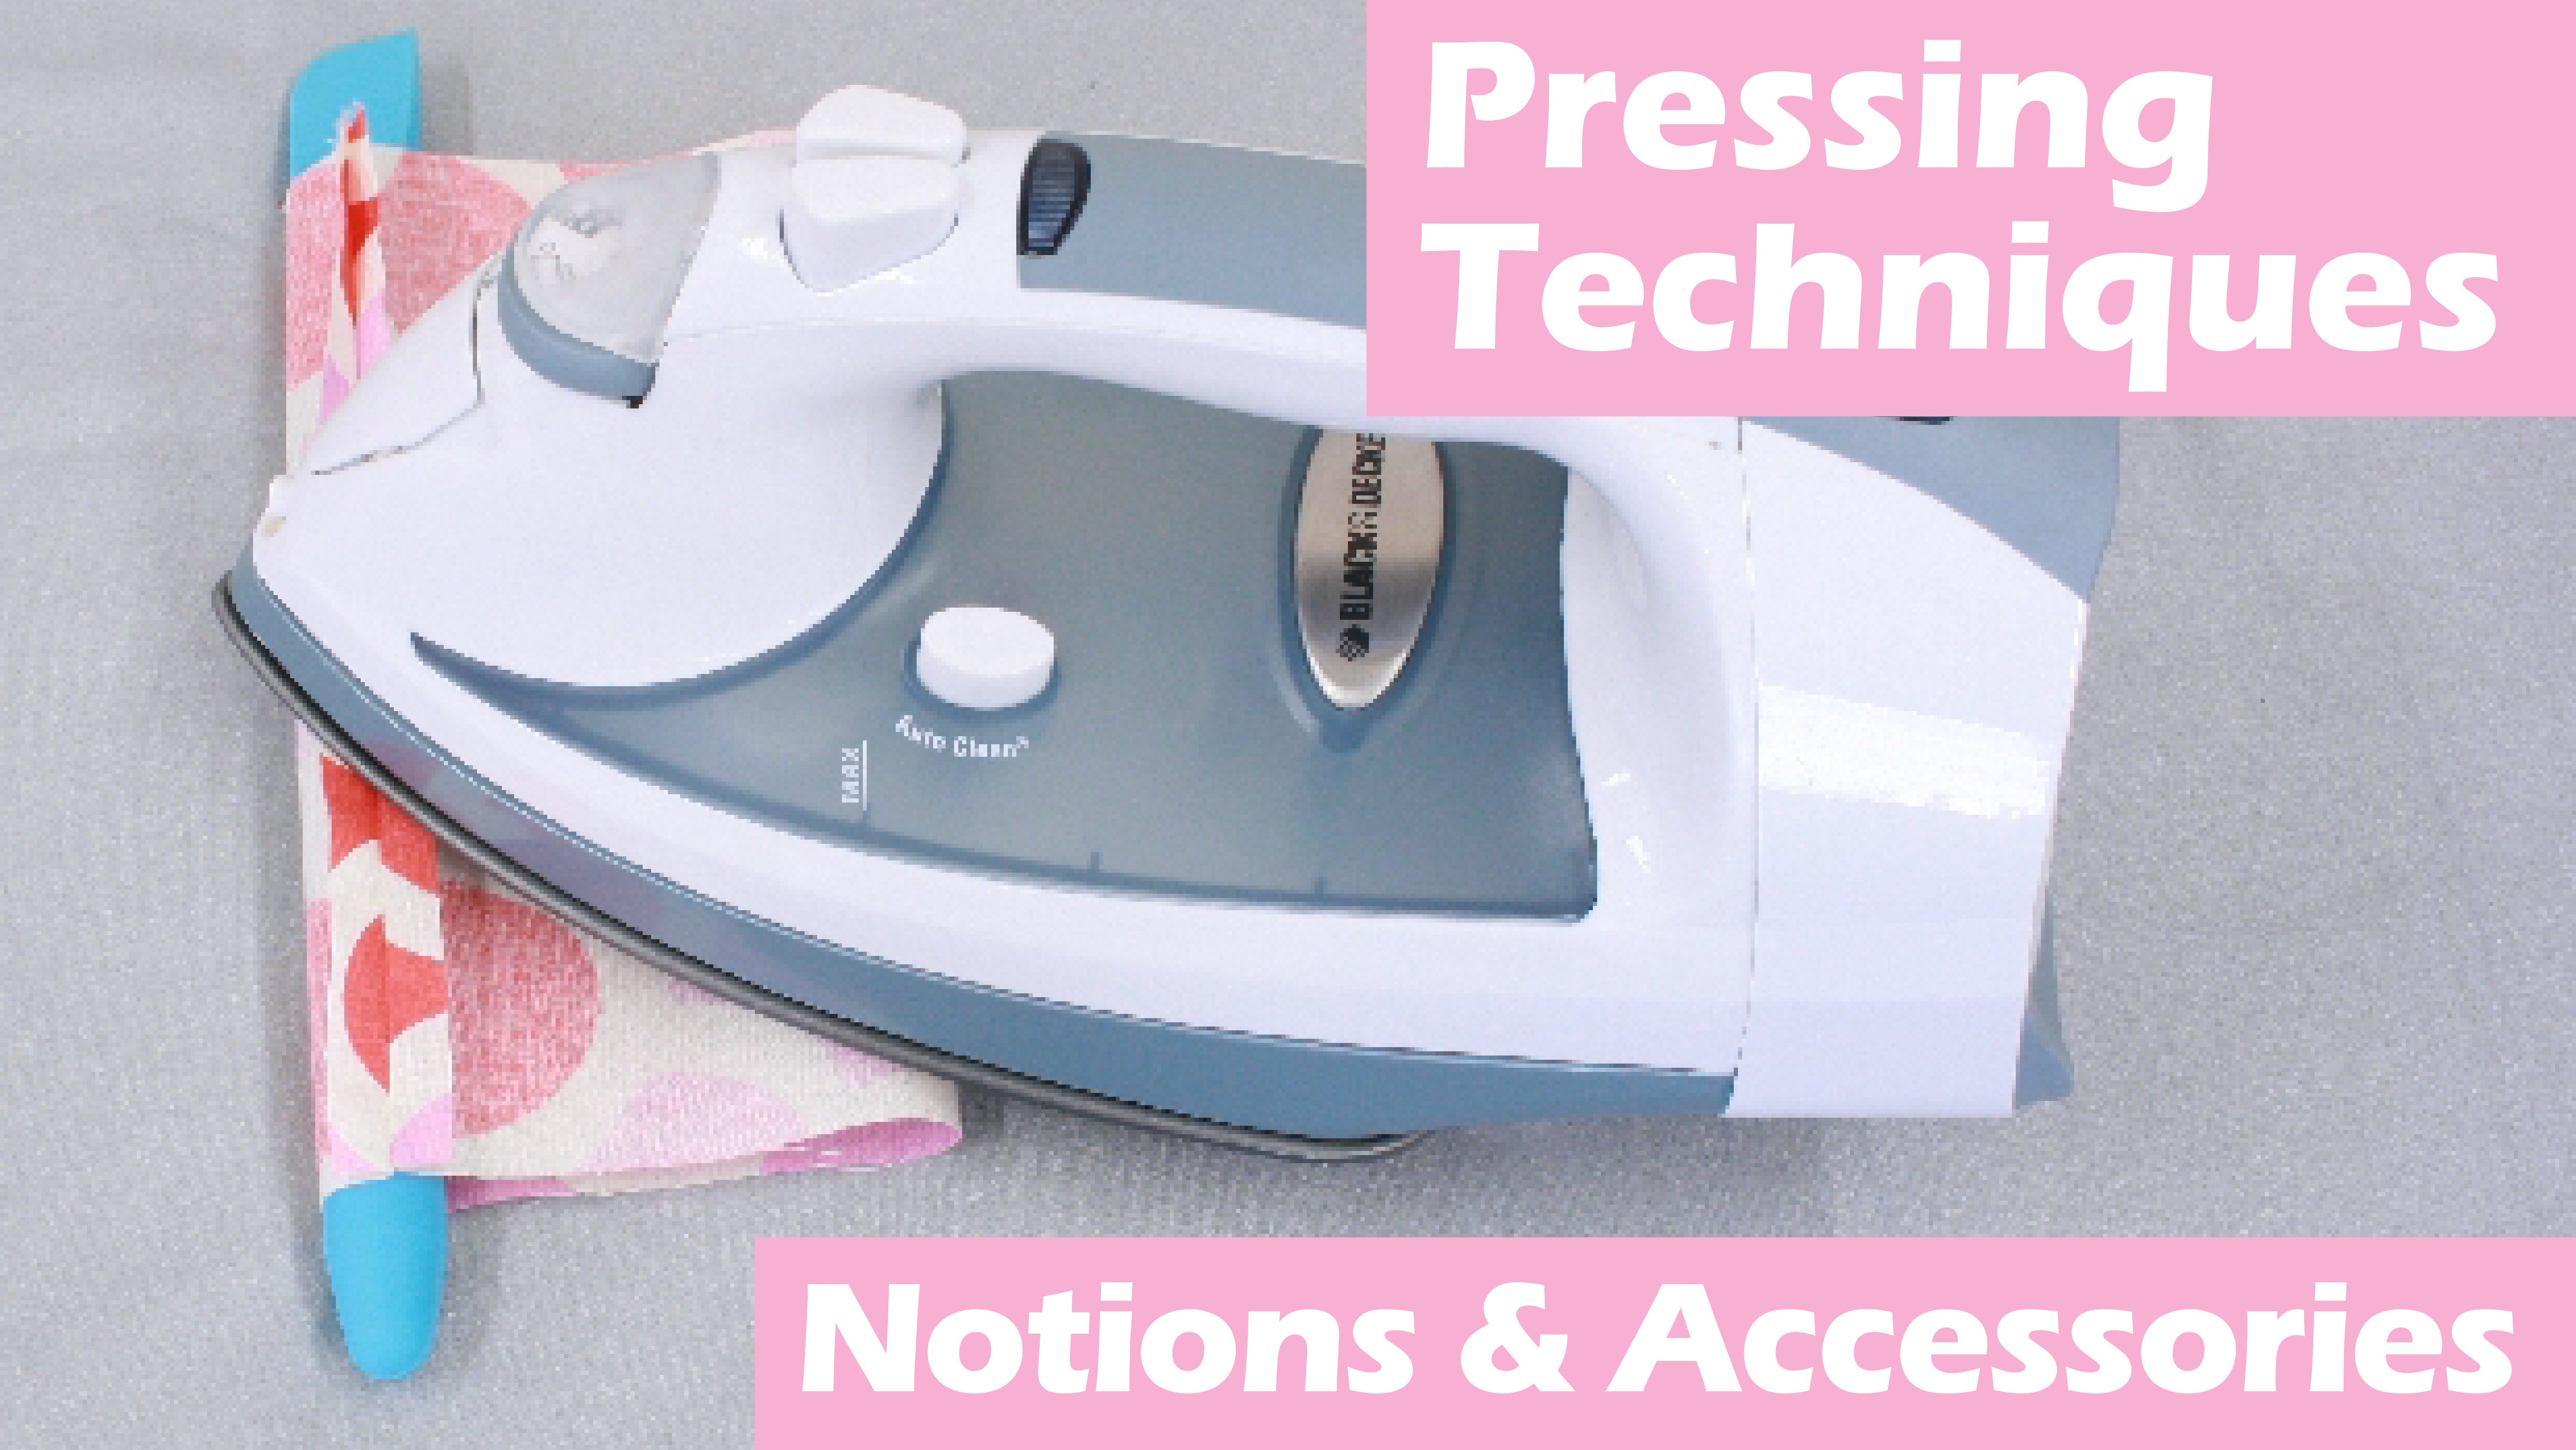 How To Press For Success In Your Sewing And Dressmaking, Sewing Tips,  Tutorials, Projects and Events